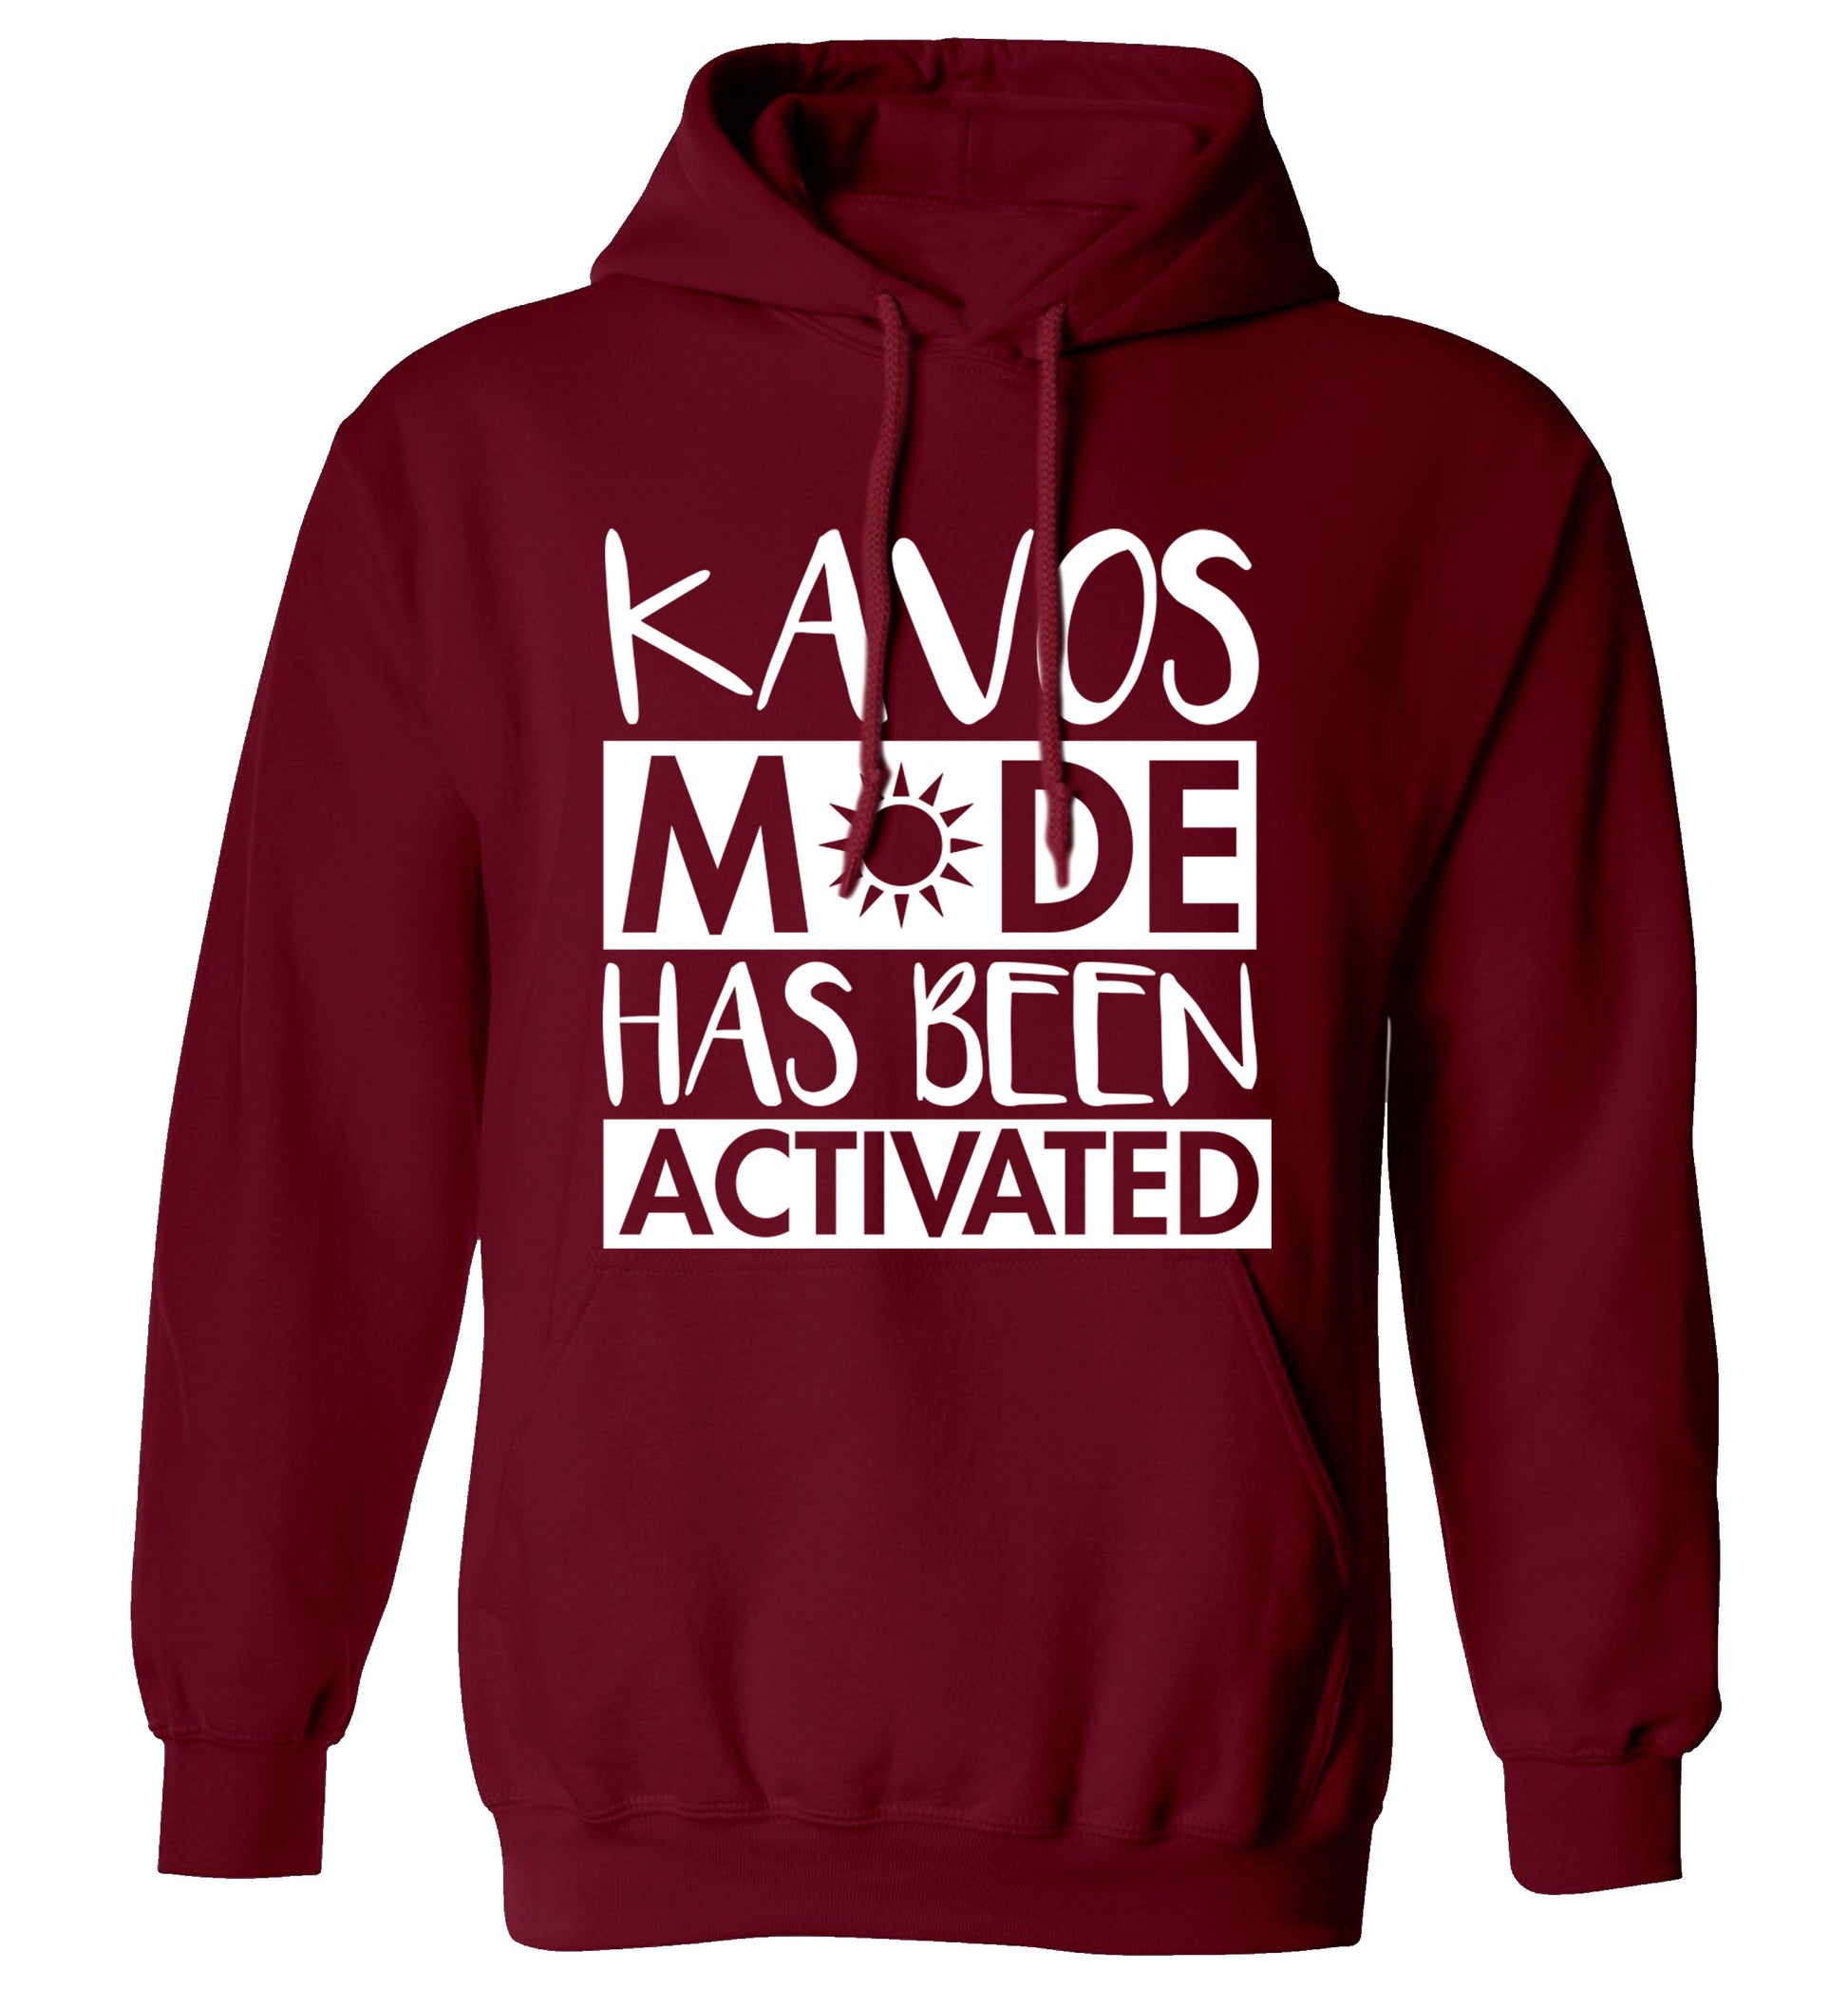 Kavos mode has been activated adults unisex maroon hoodie 2XL